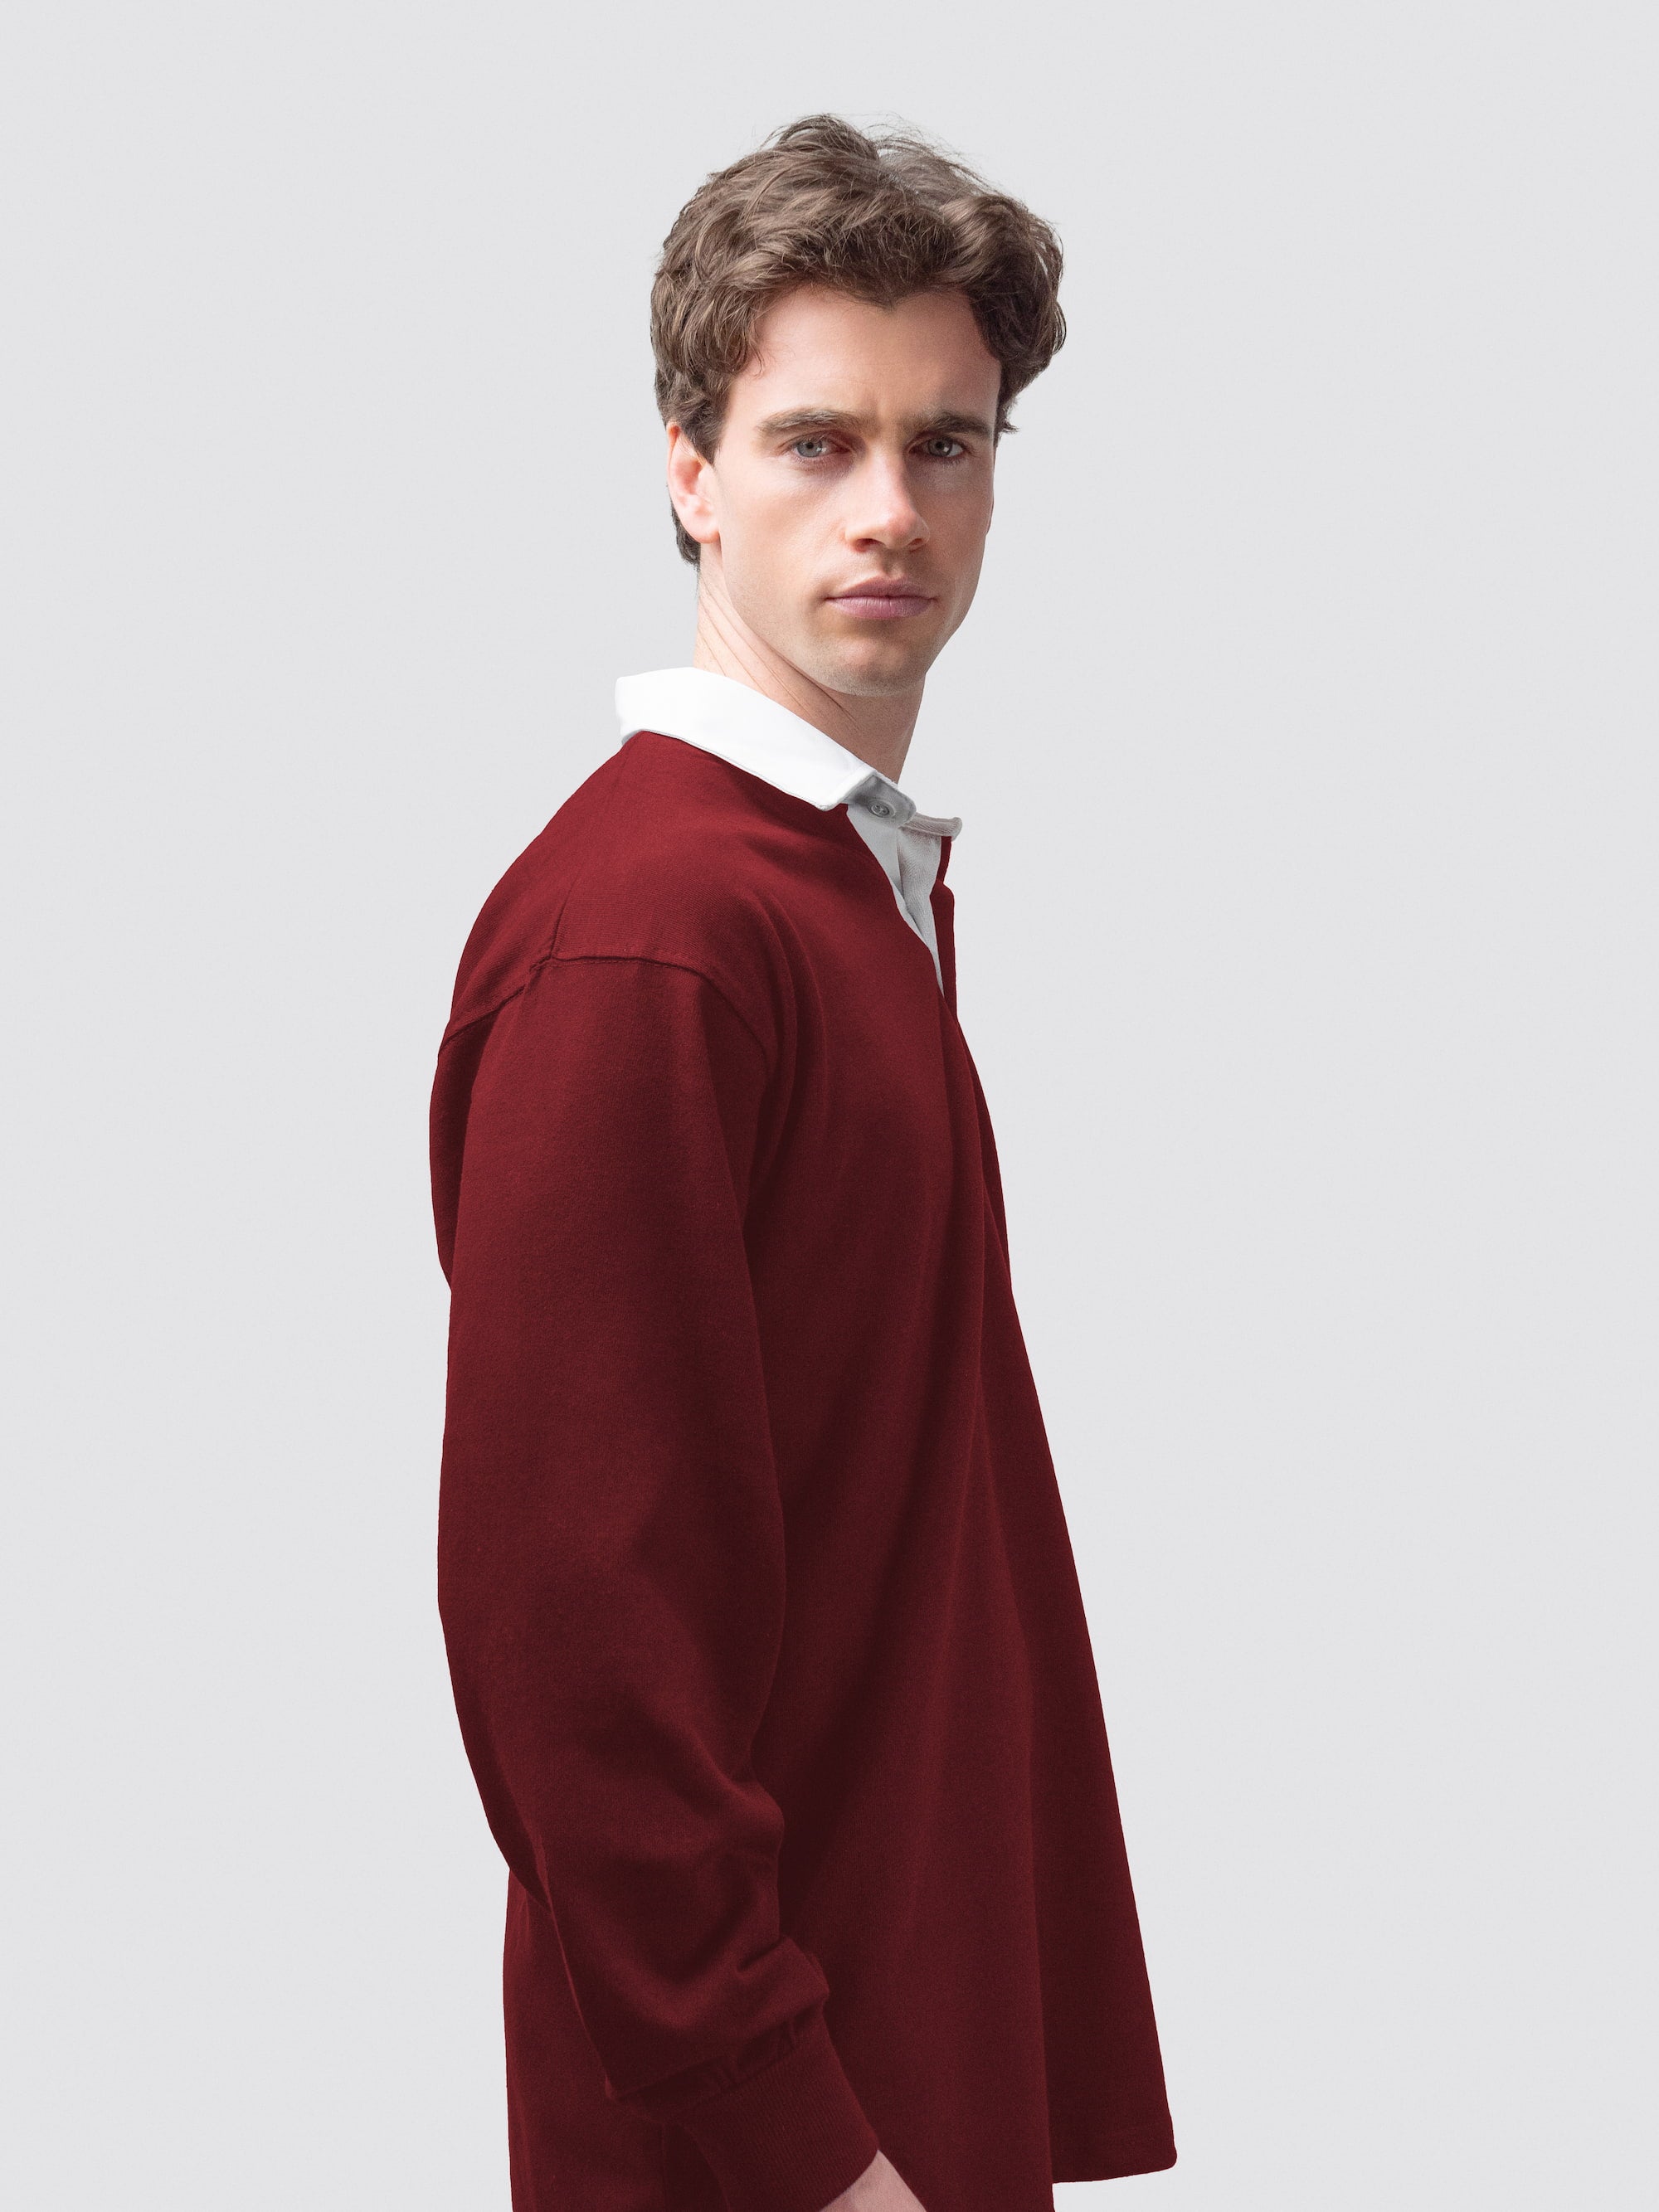 A deep burgundy, Cambridge University rugby shirt with white contrast  collar